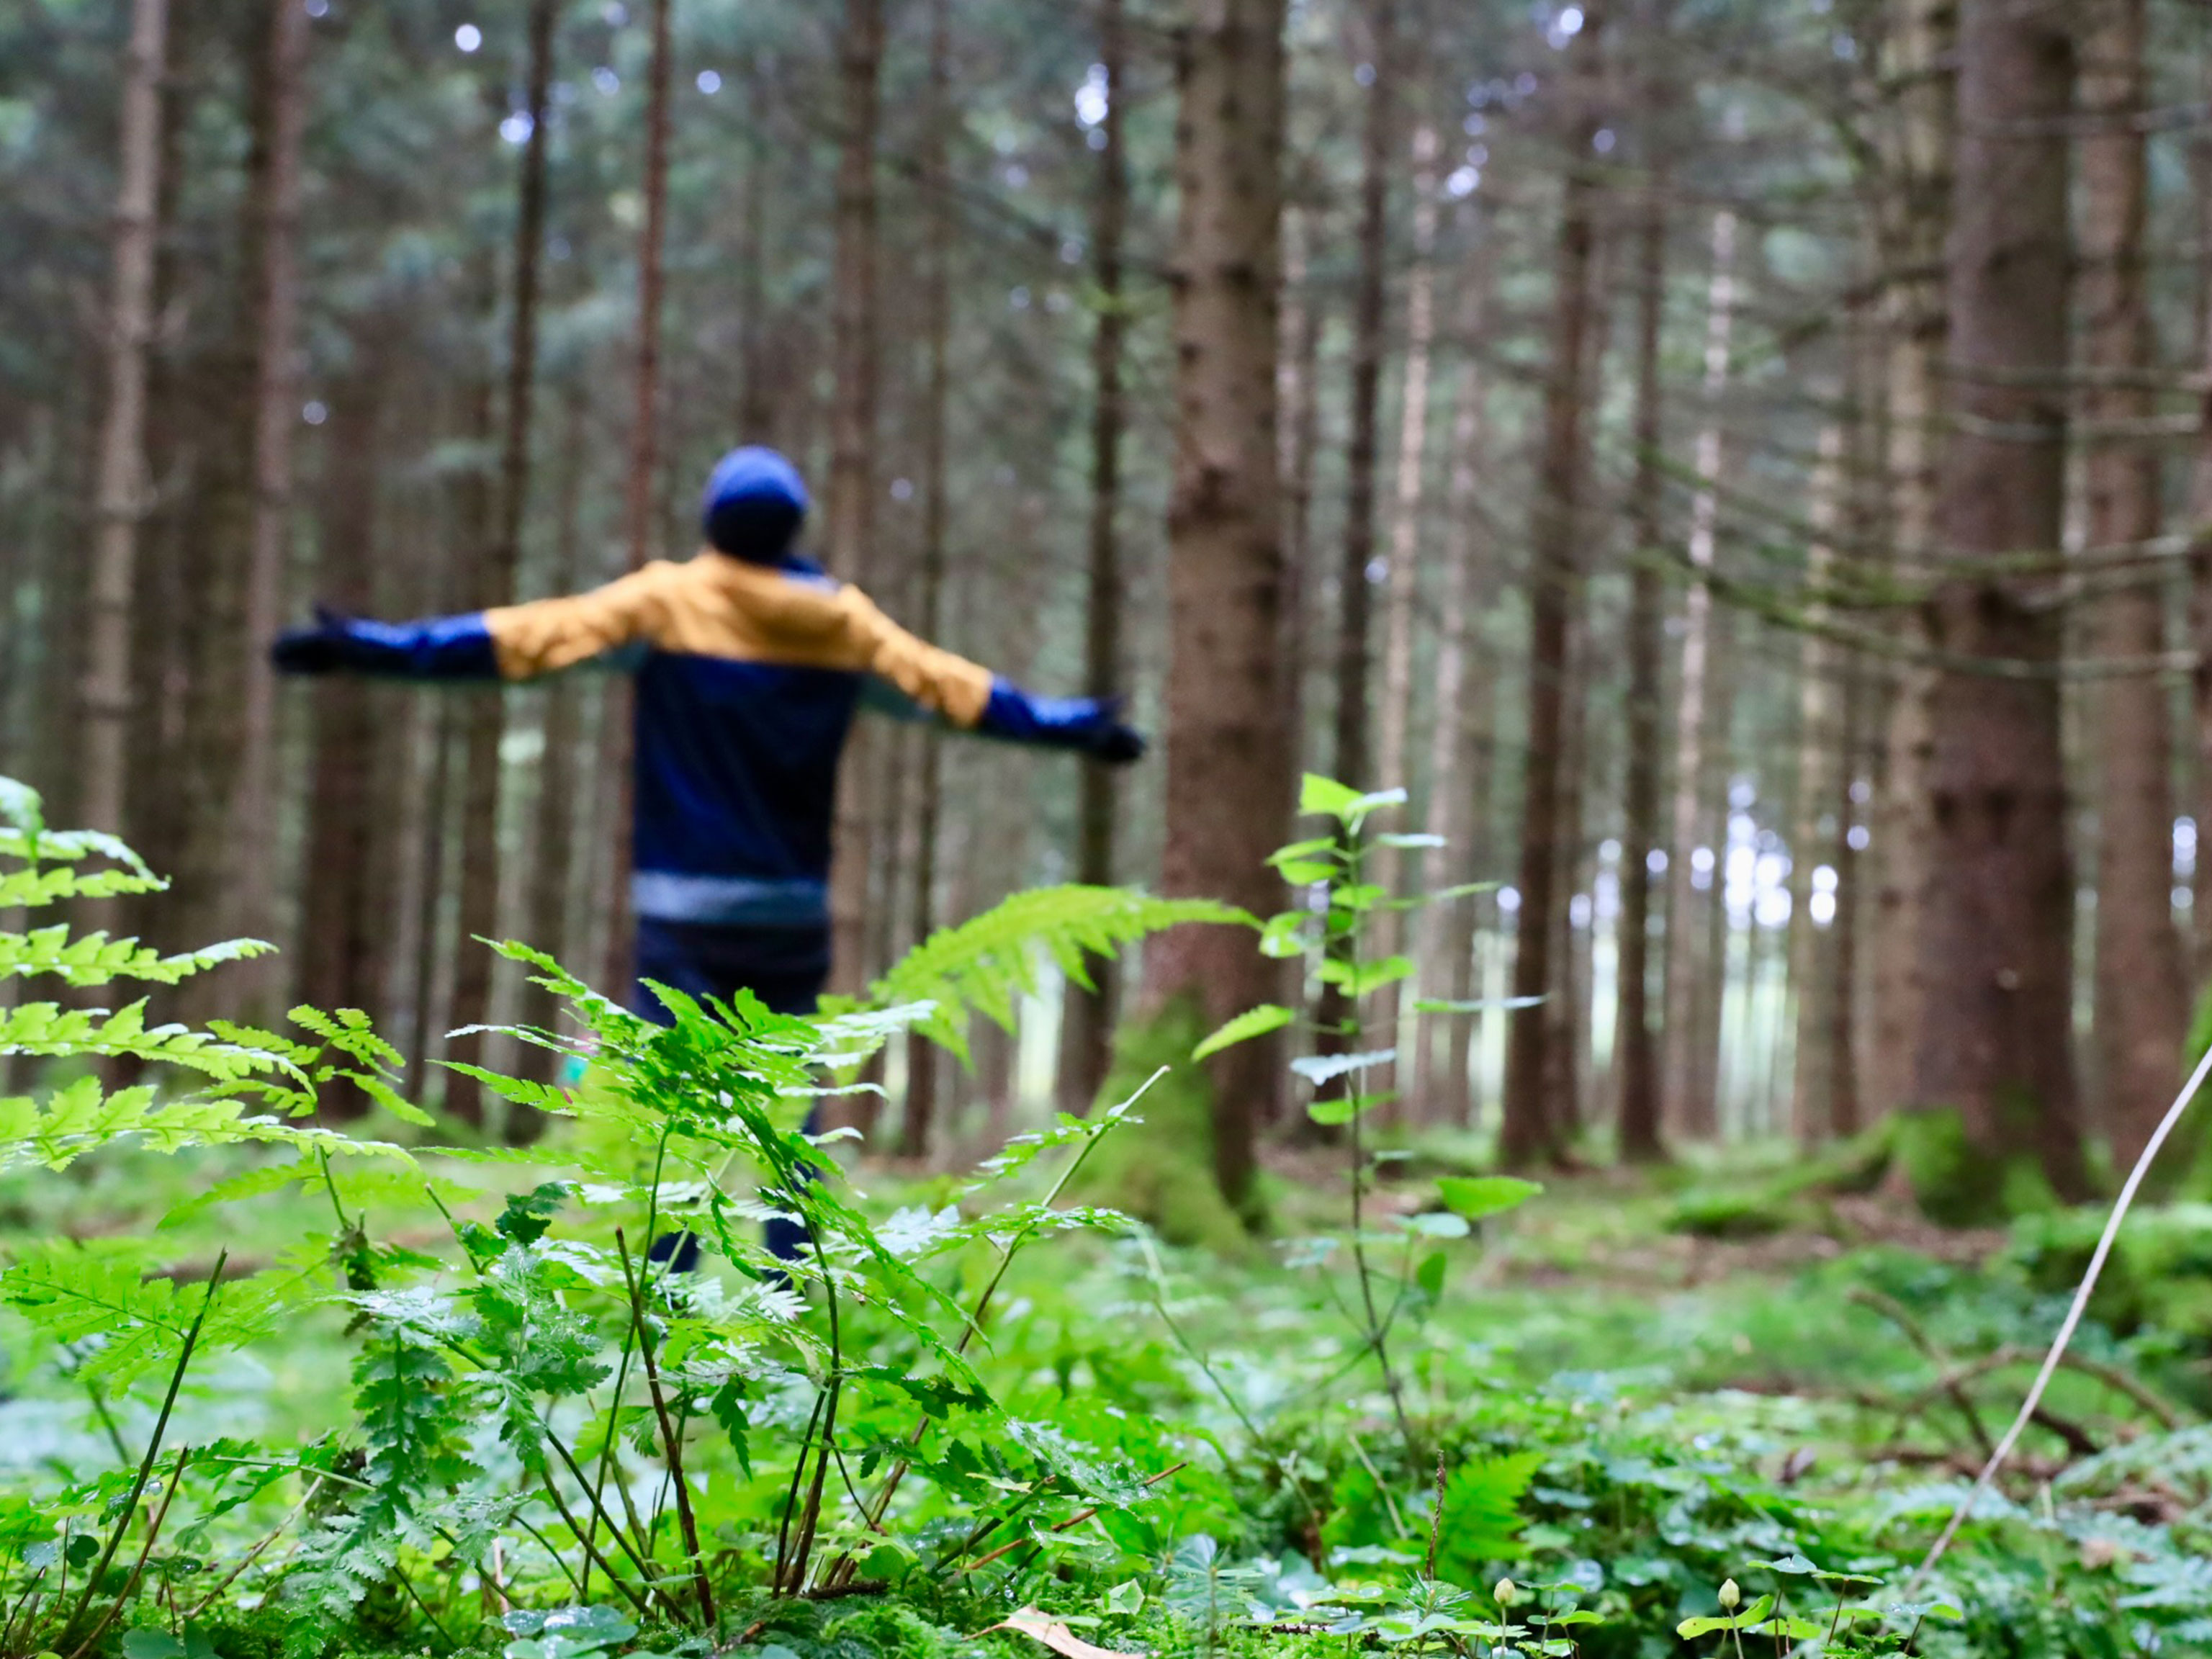 A man standing in the forest with his arms outstretched